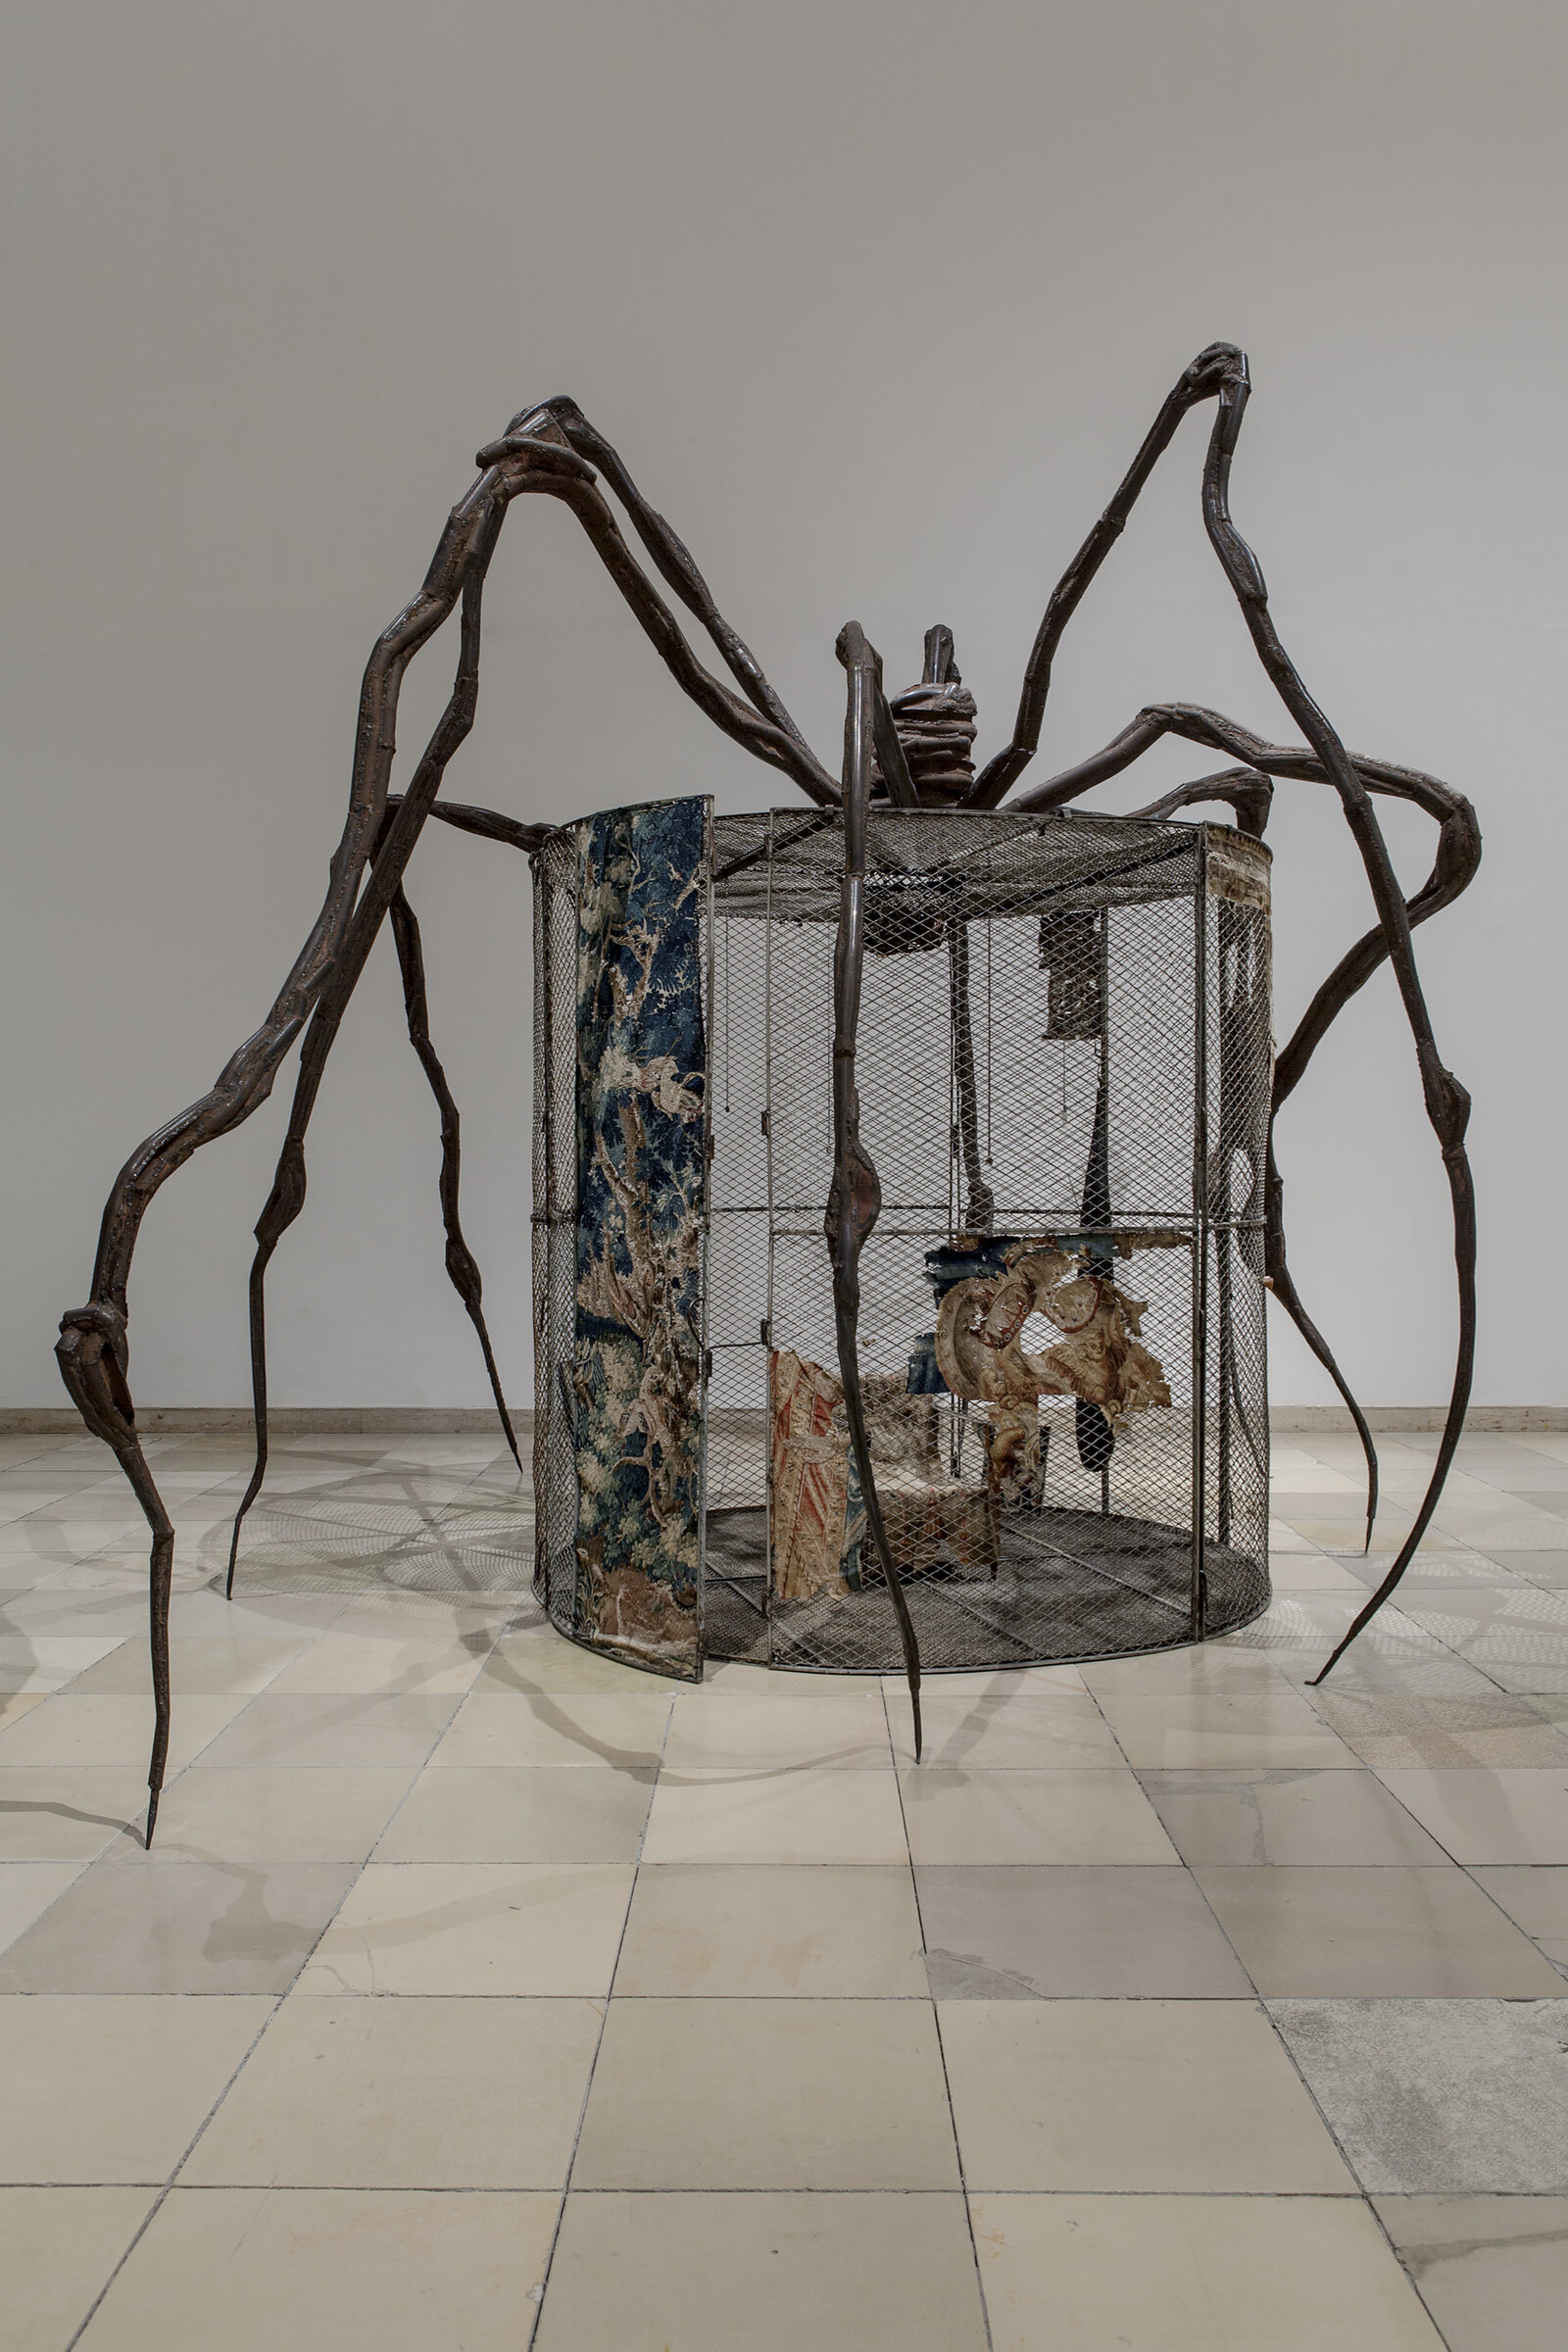 Louise Bourgeois Spider Tapestries for Sale